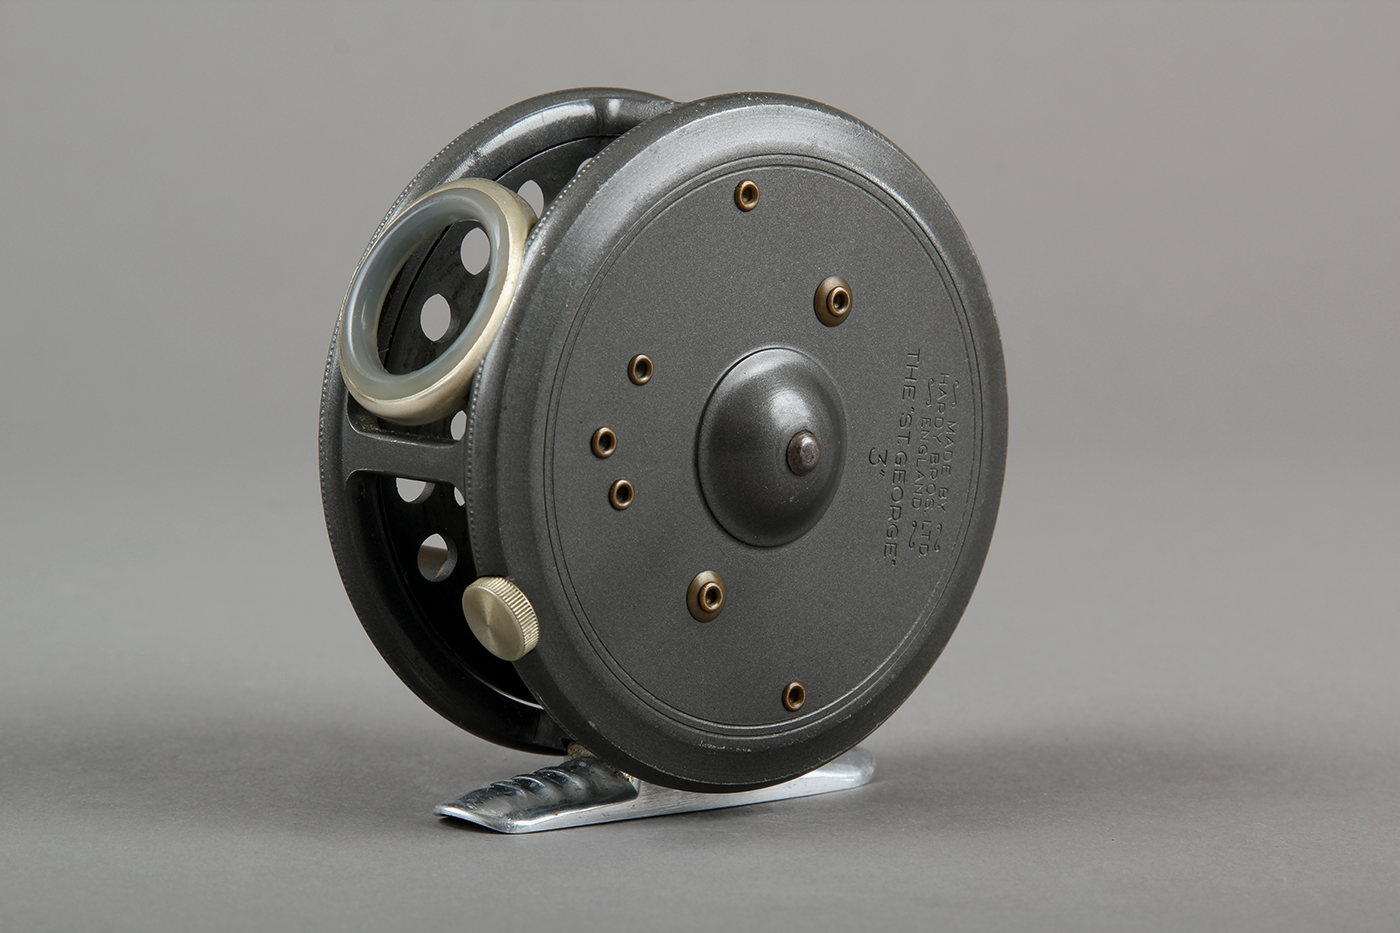 Hardy St. George 3 Fly Fishing Reel. Made in England. See Description.